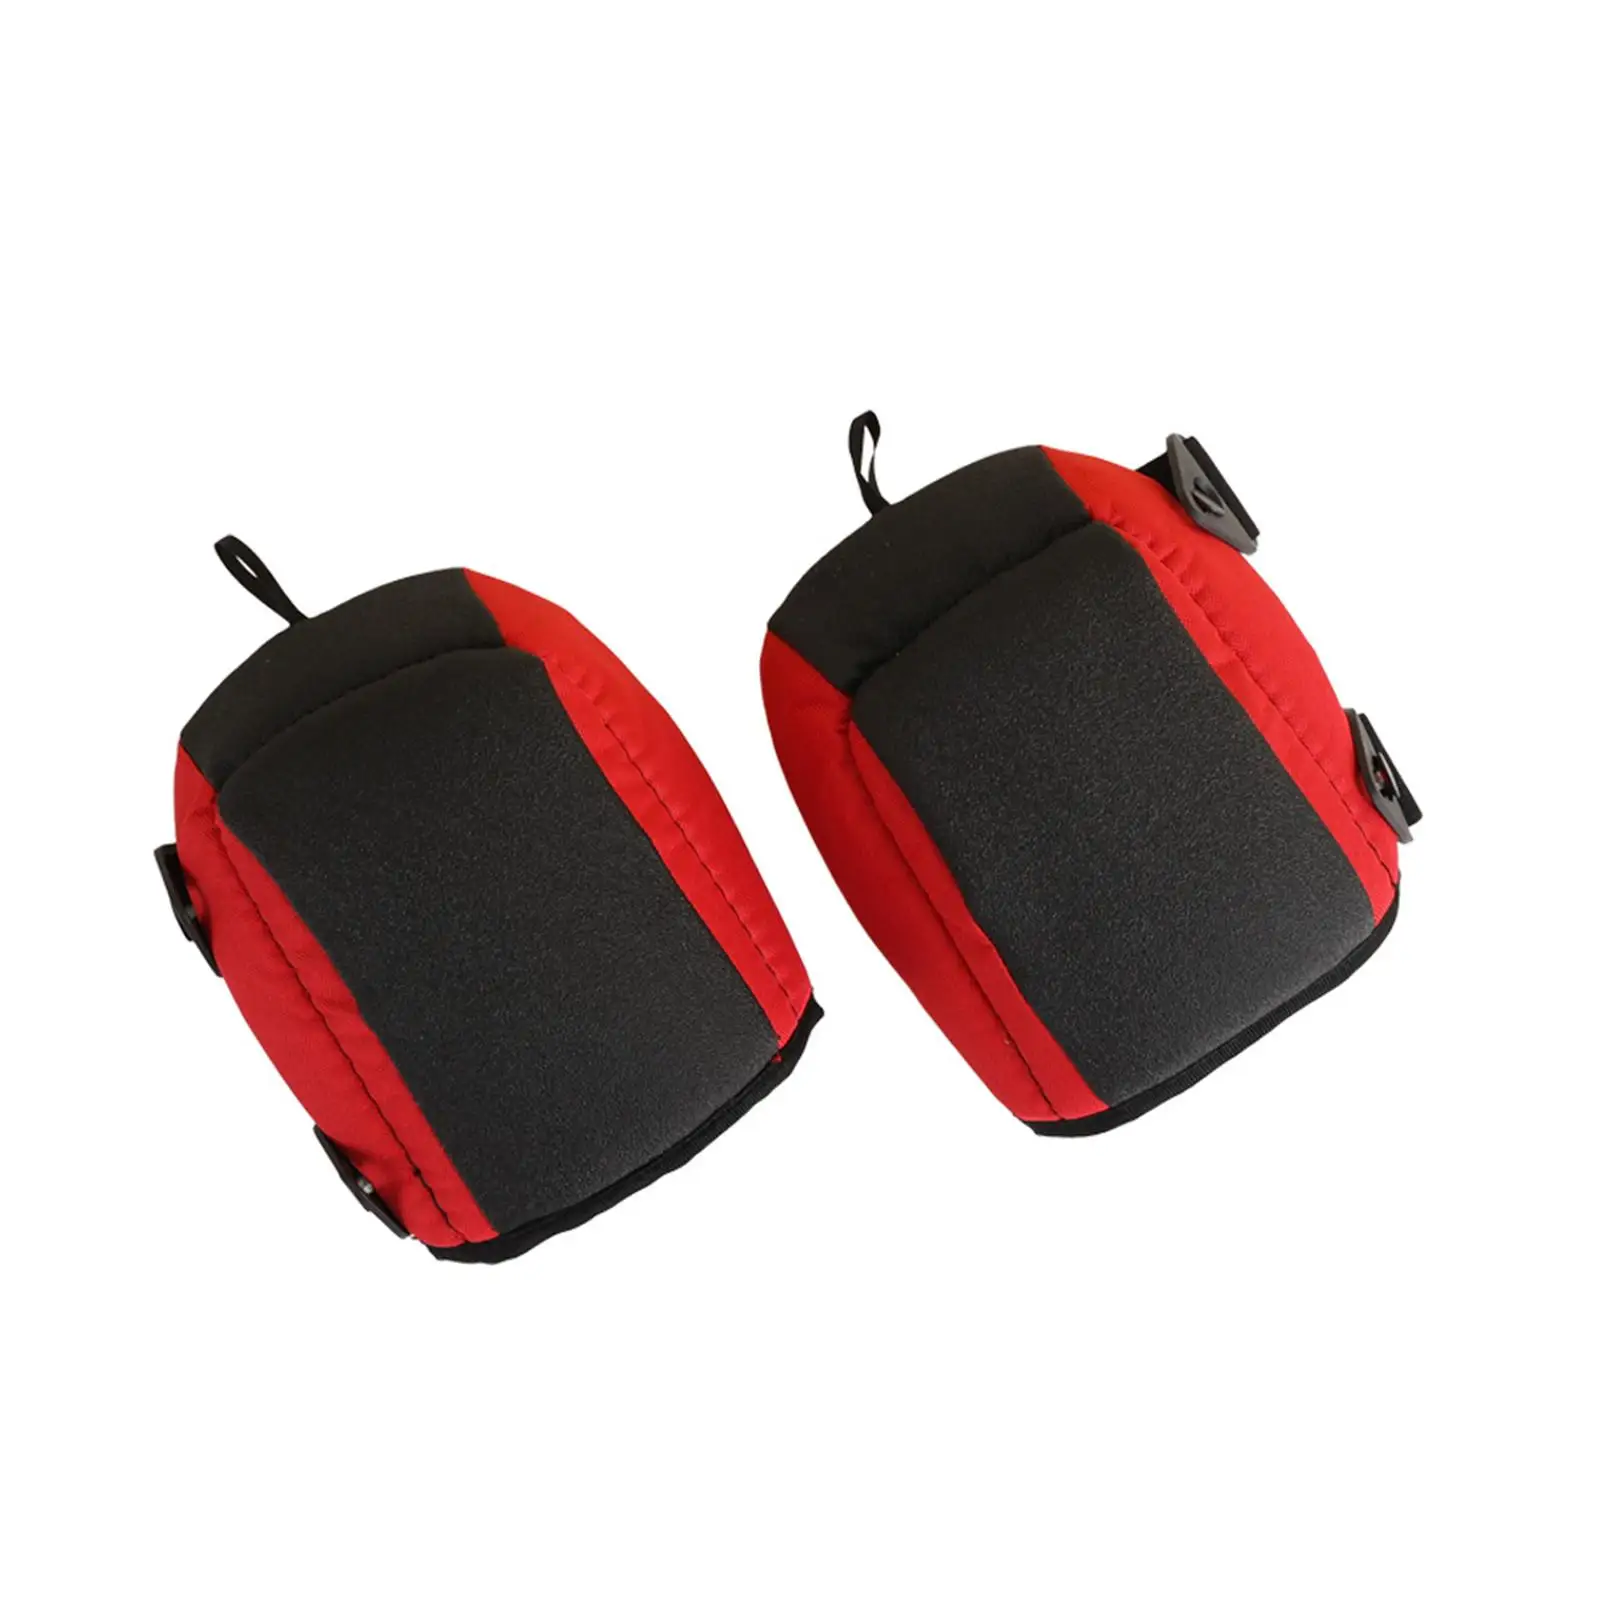 2 Pieces Knee Pads for Work Gardening for Cleaning Flooring Skiing Knee Pads